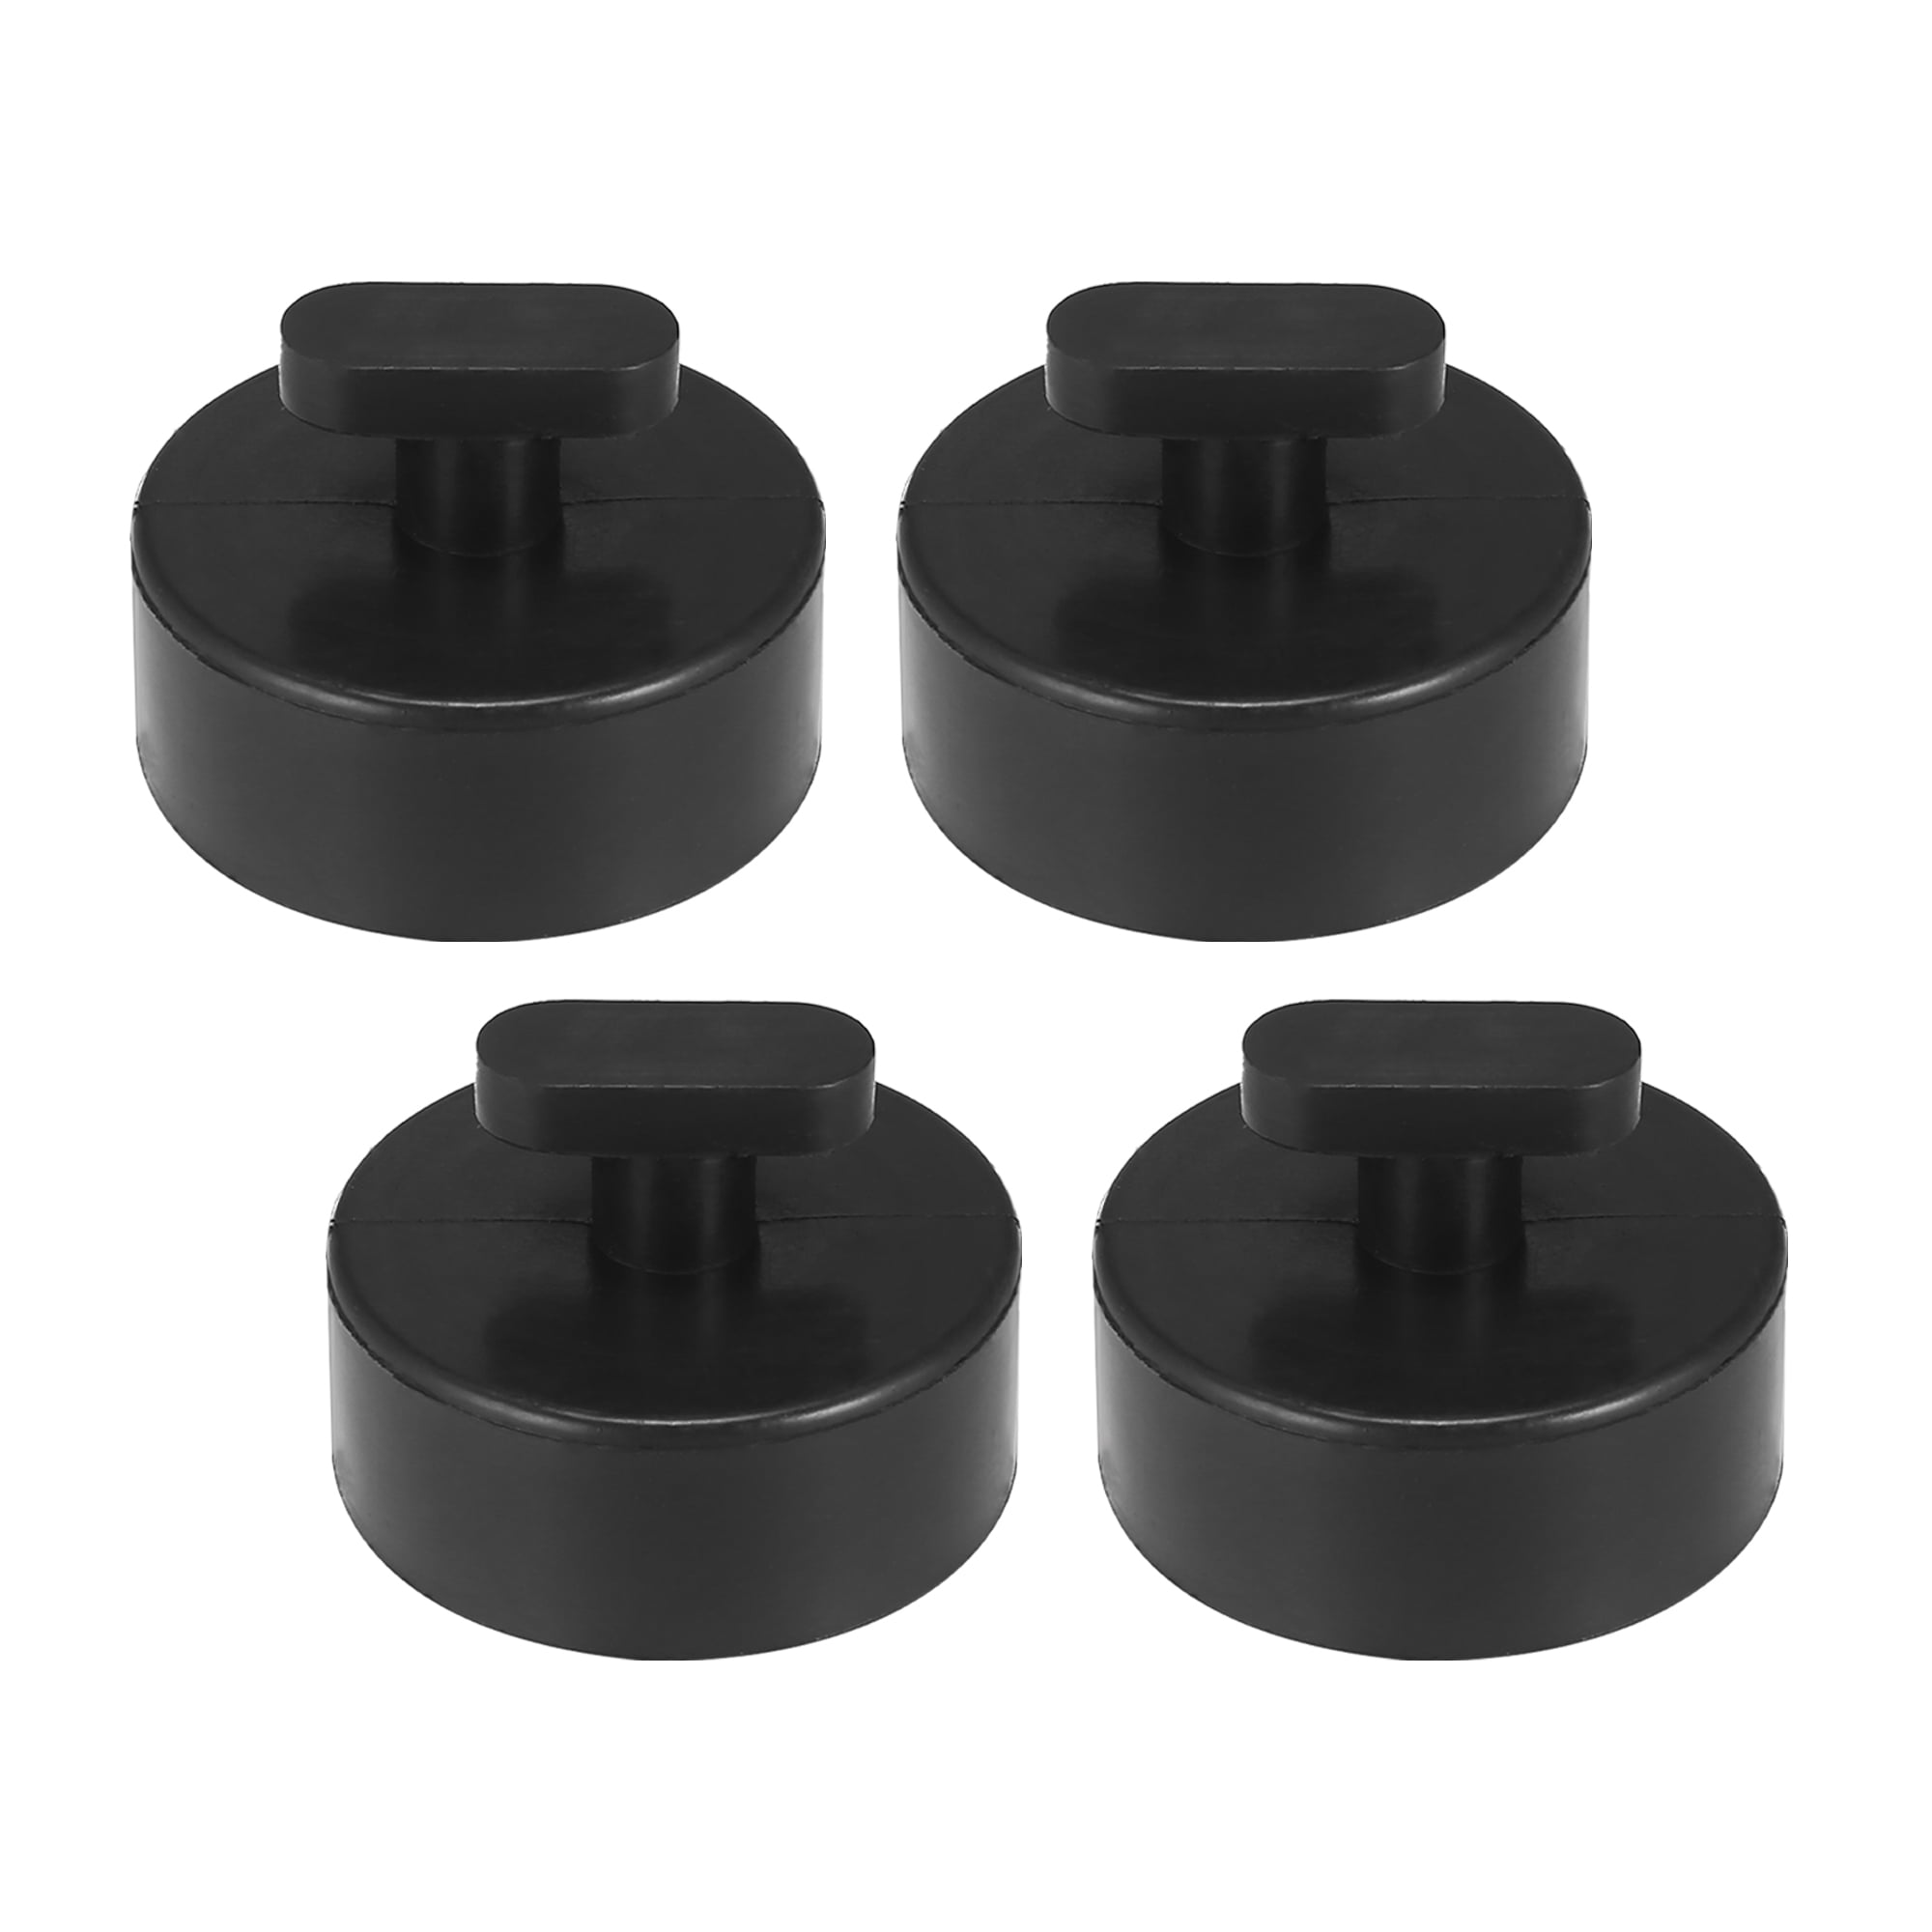 Jack Point Pad Sturdy Adapter Rubber Jack Puck DEDC 4 Pack Jack Pad Jacking Lift Pad for Chevrolet Corvette C5 C6 C7 